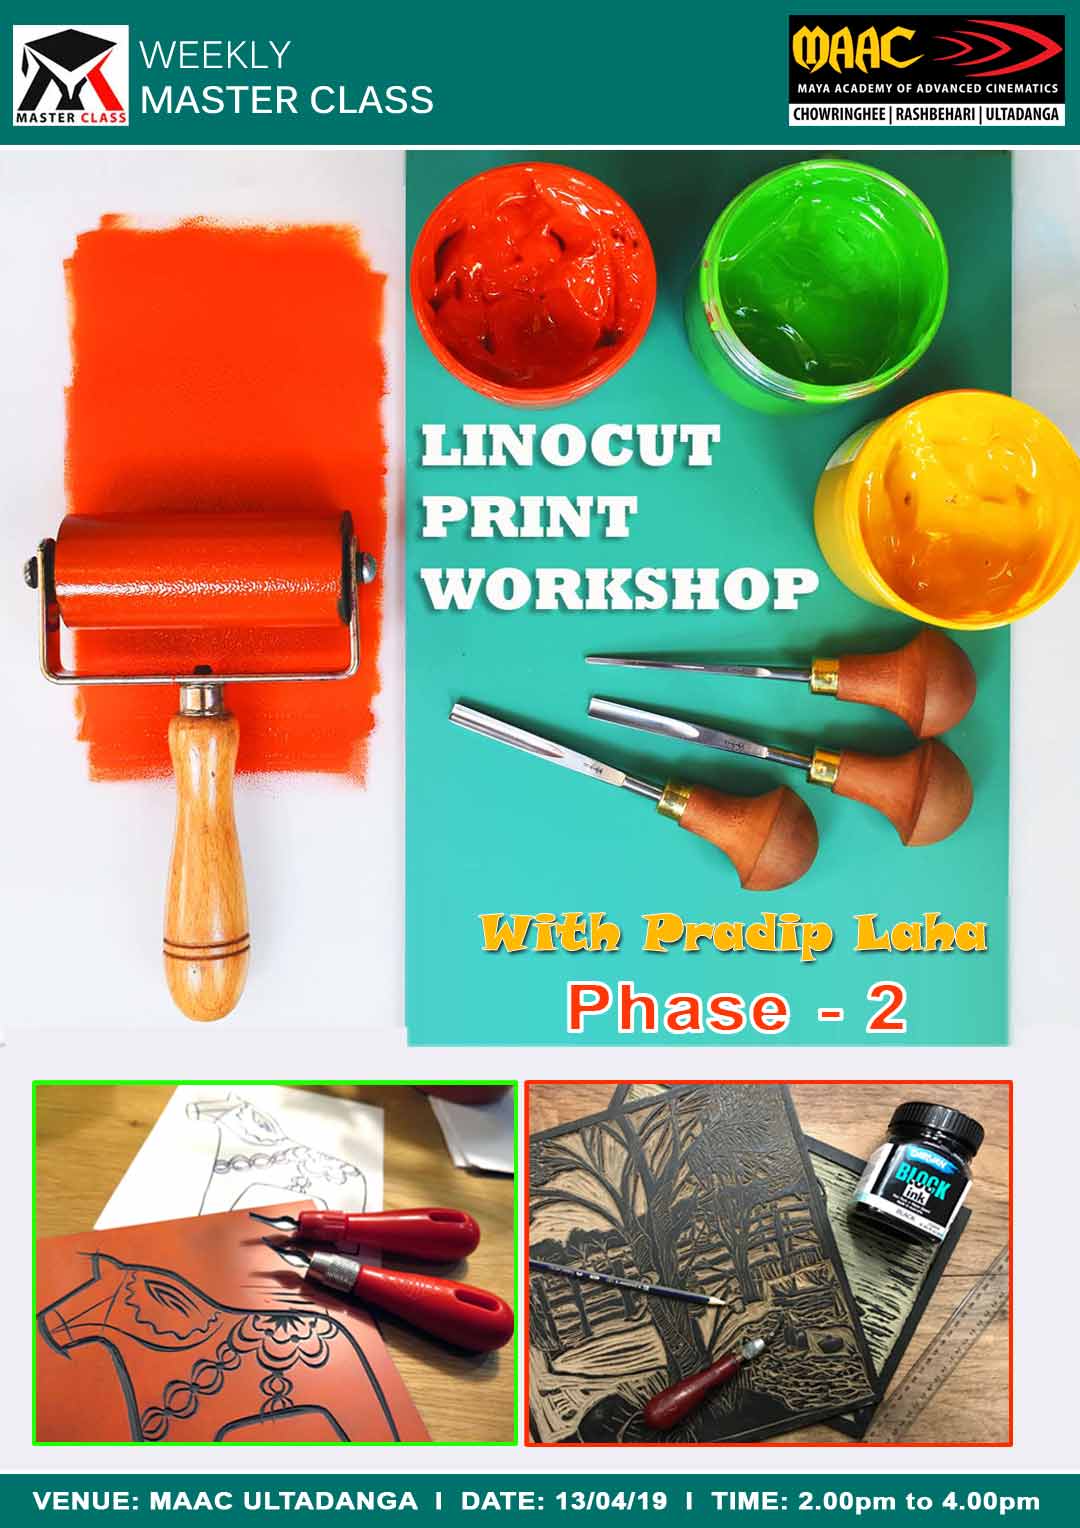 Weekly Master Class on Linocut Print Workshop Phase-2